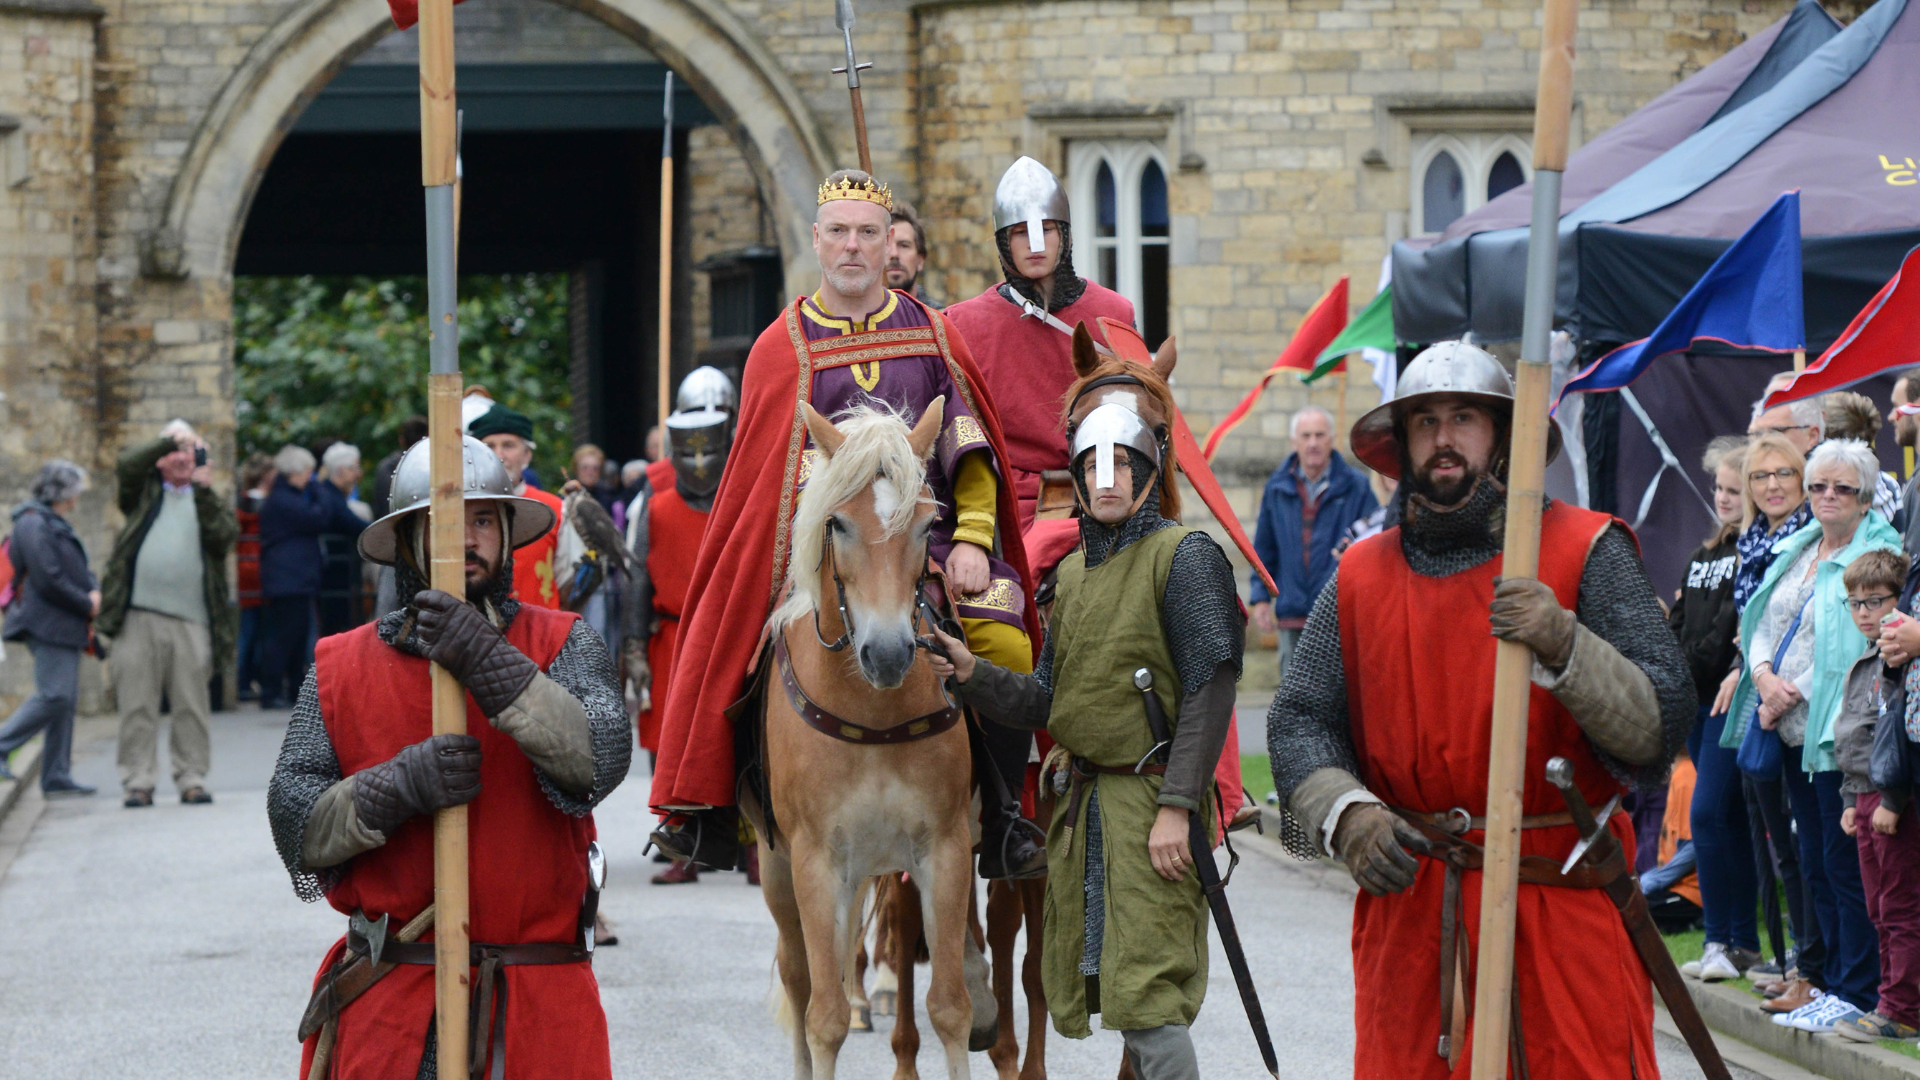 Medieval re-enactors a knight and soldiers